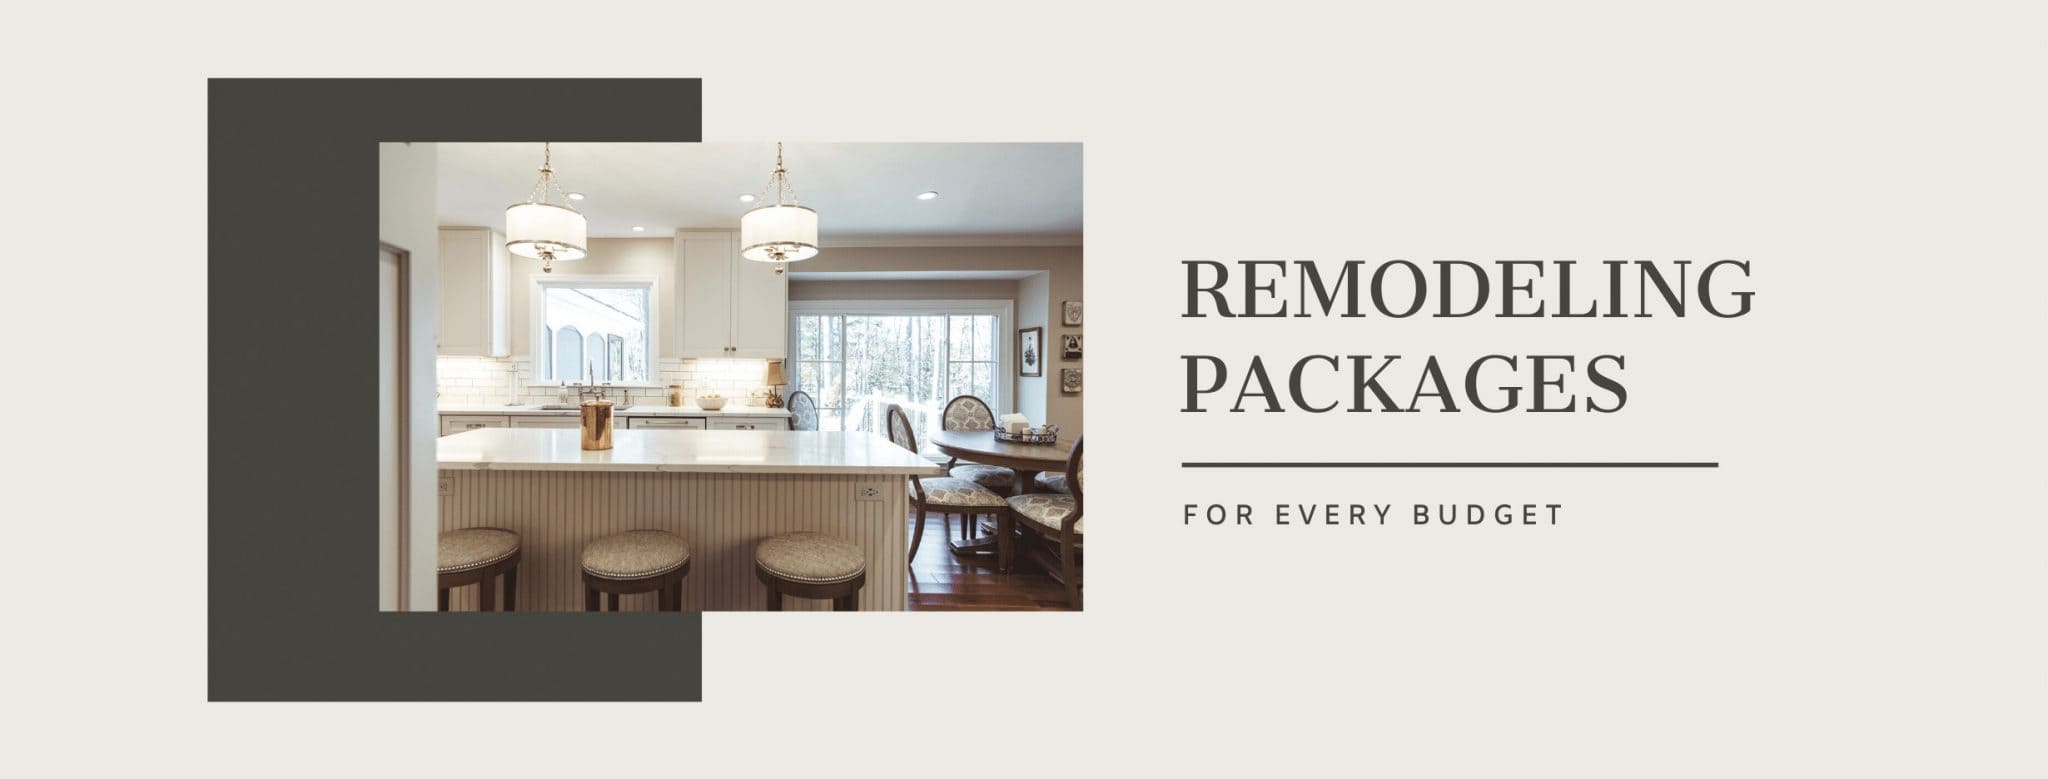 remodeling packages